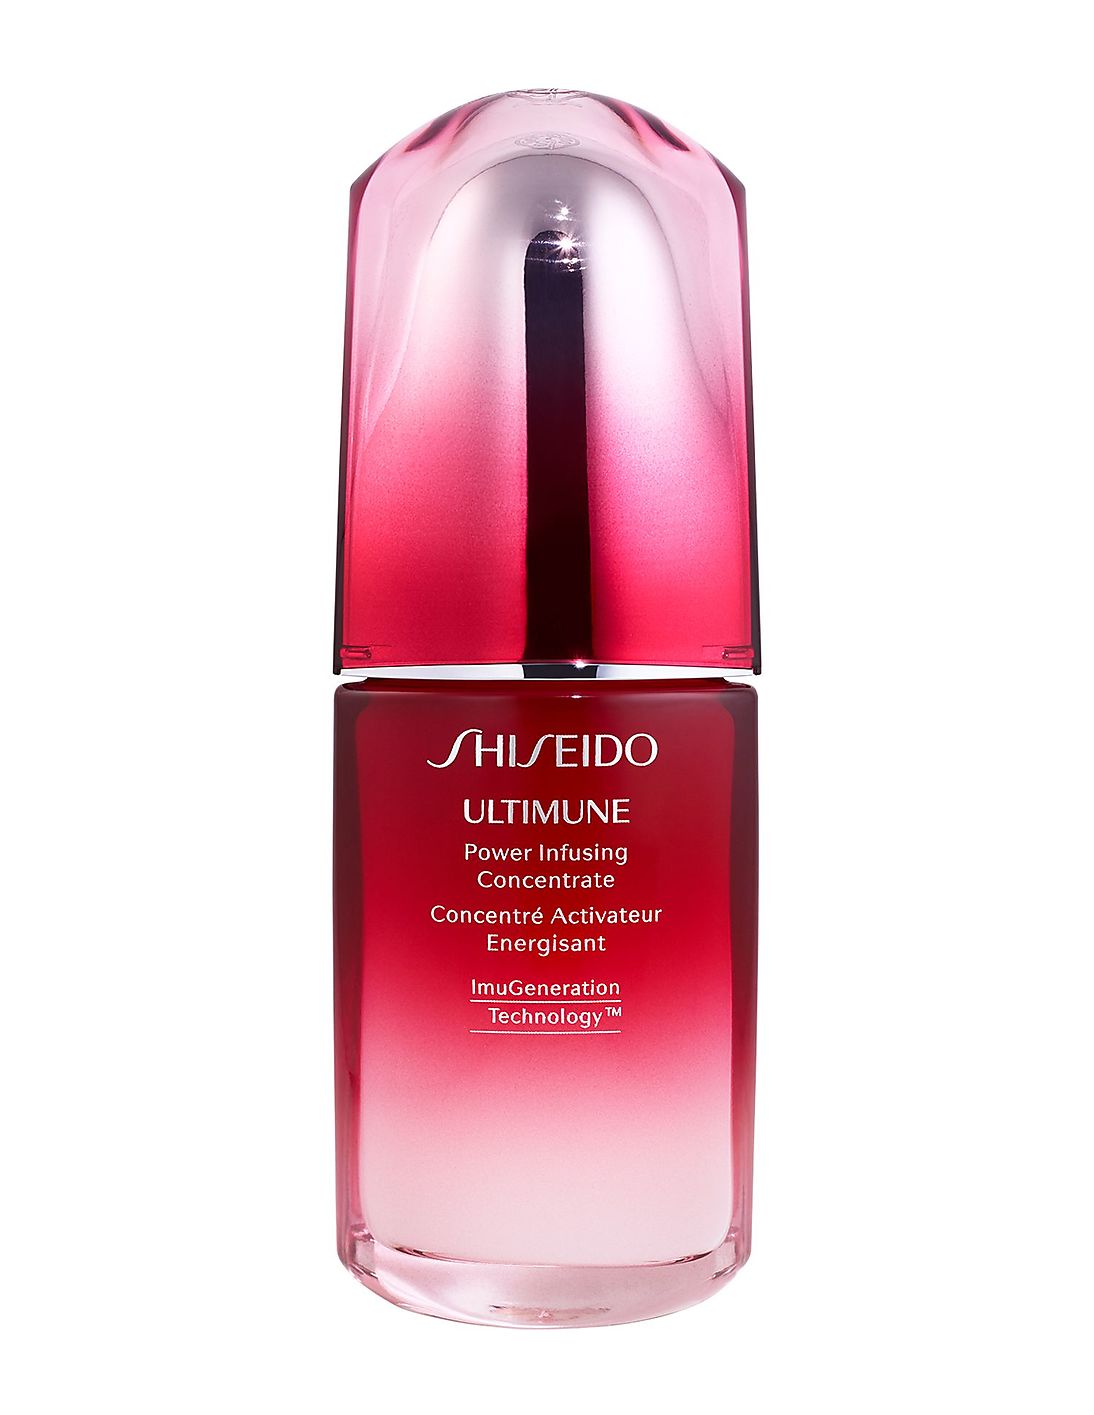 Shiseido- Ultimune Power Infusing Concentrate- sephora- 6,800